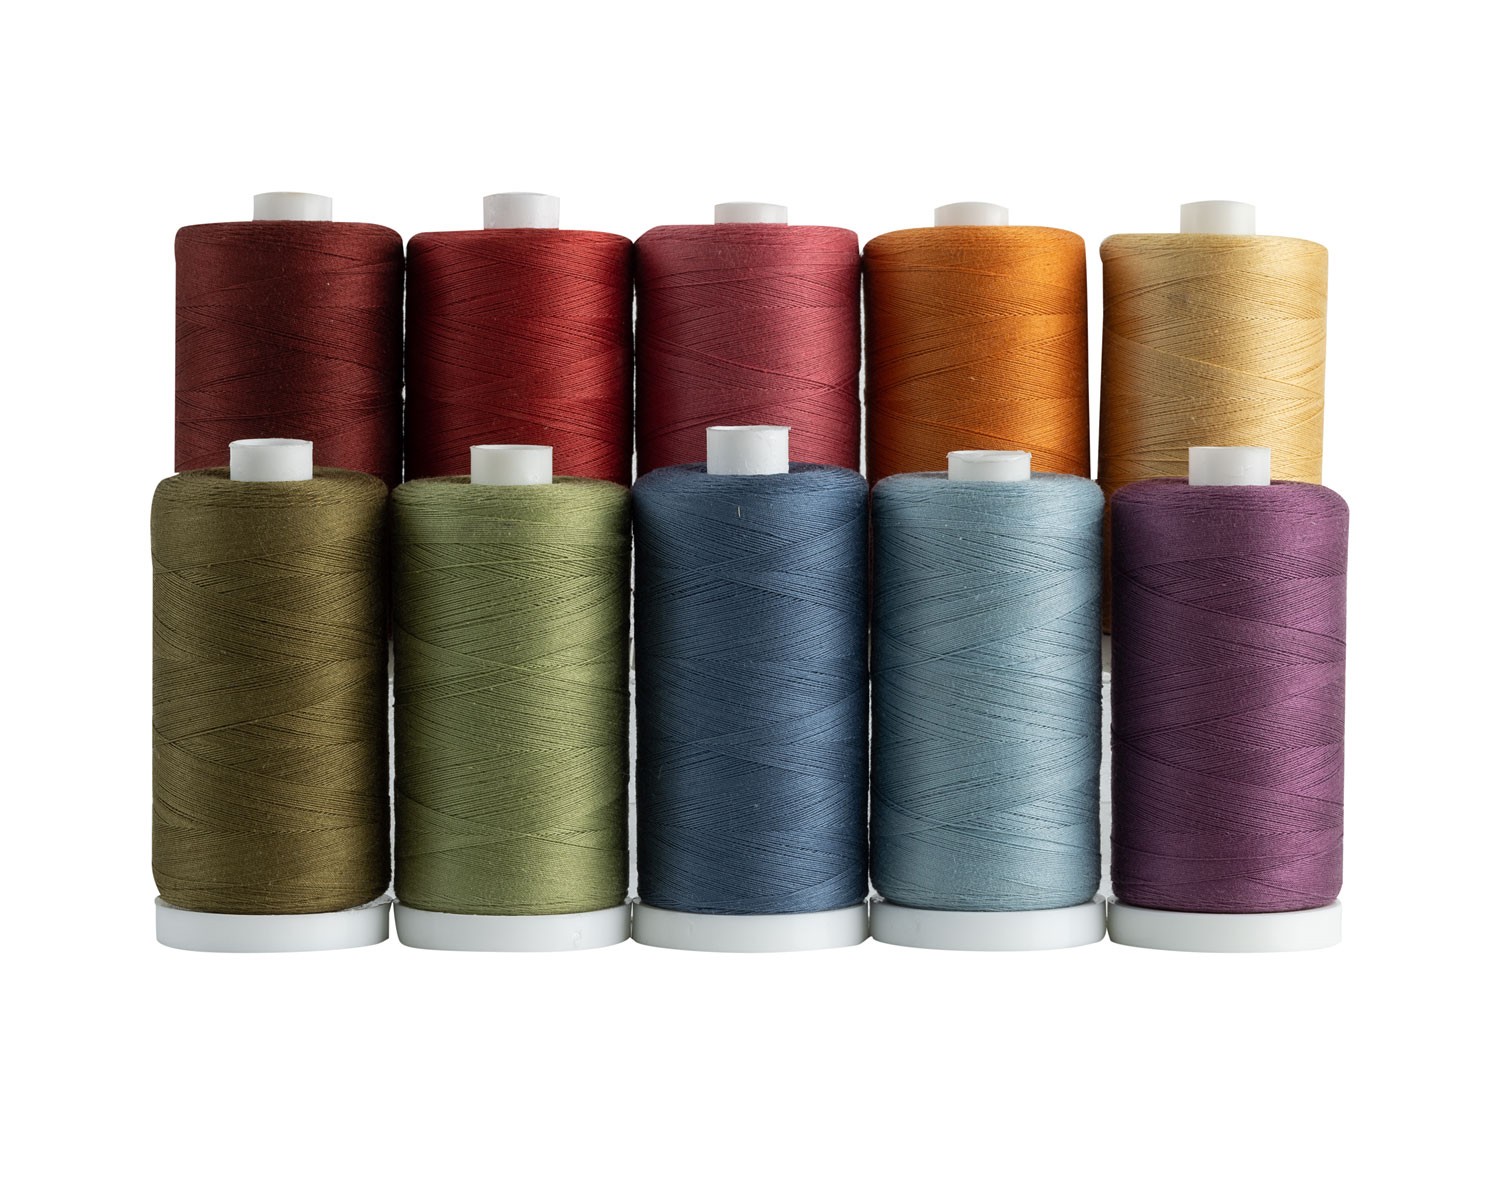 20 Colors of Polyester Embroidery Thread Set - Essential Colors